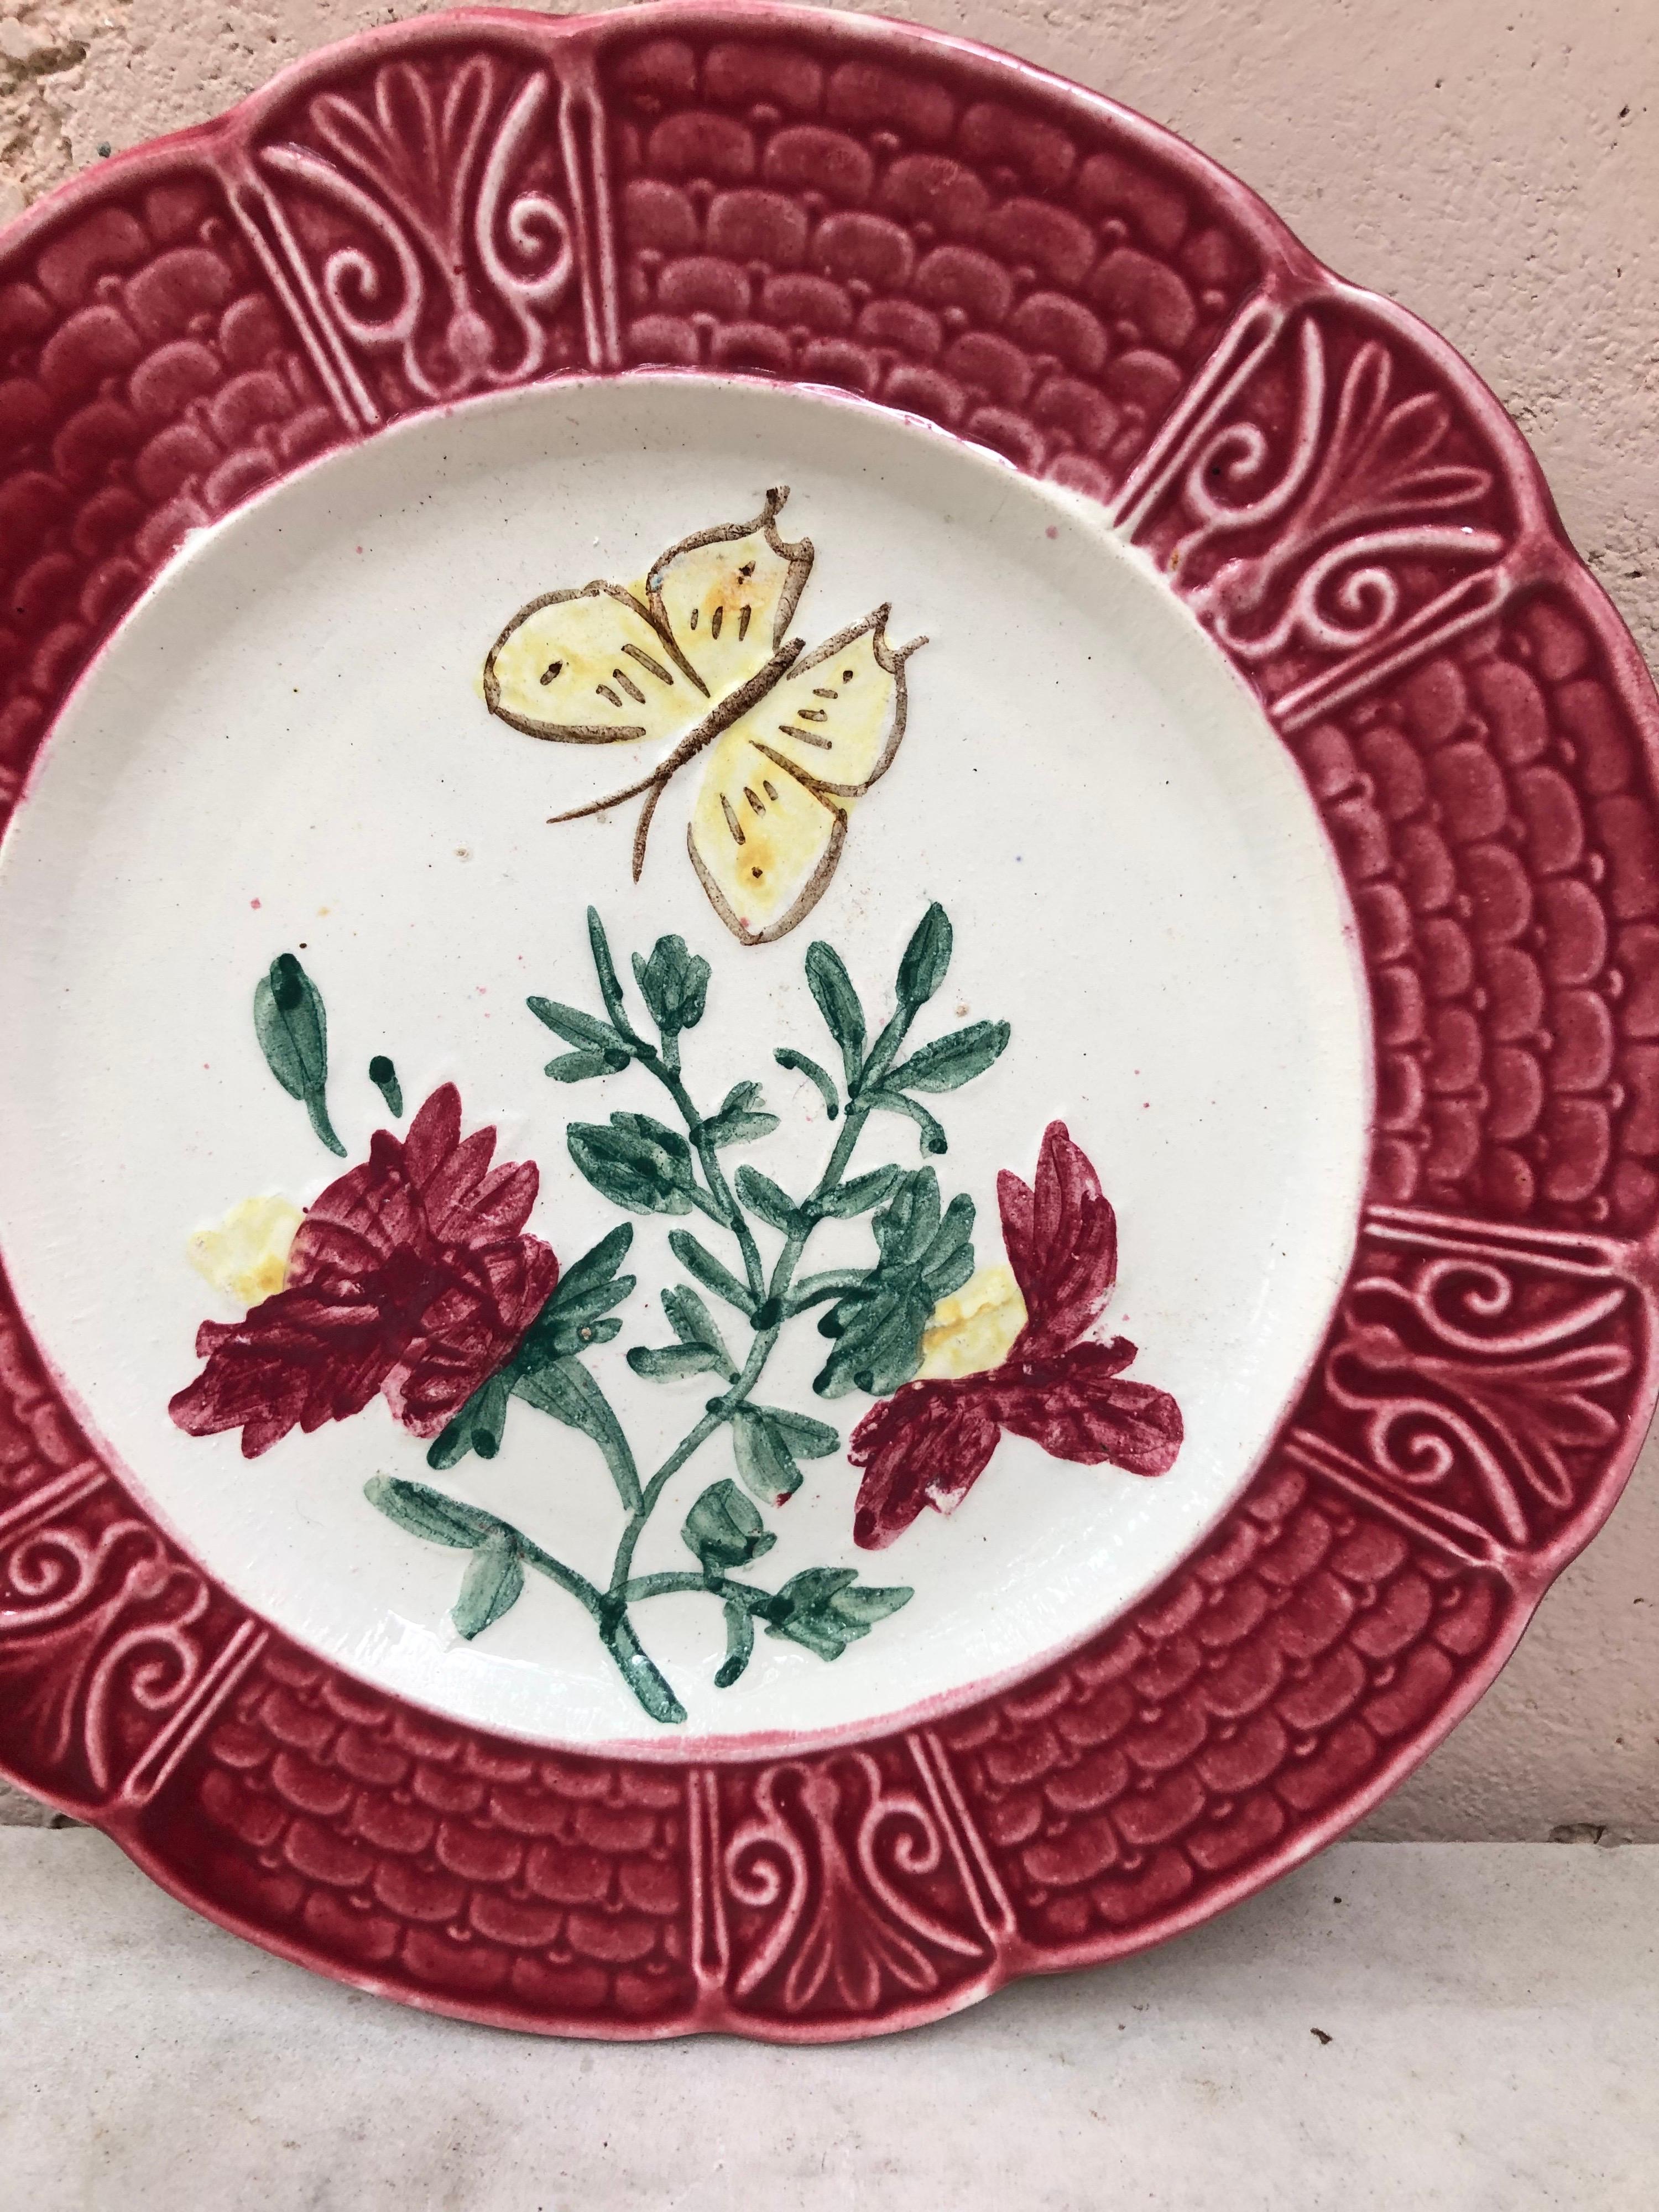 Rustic French Majolica Plate with Flowers & Butterfly, Circa 1900 For Sale